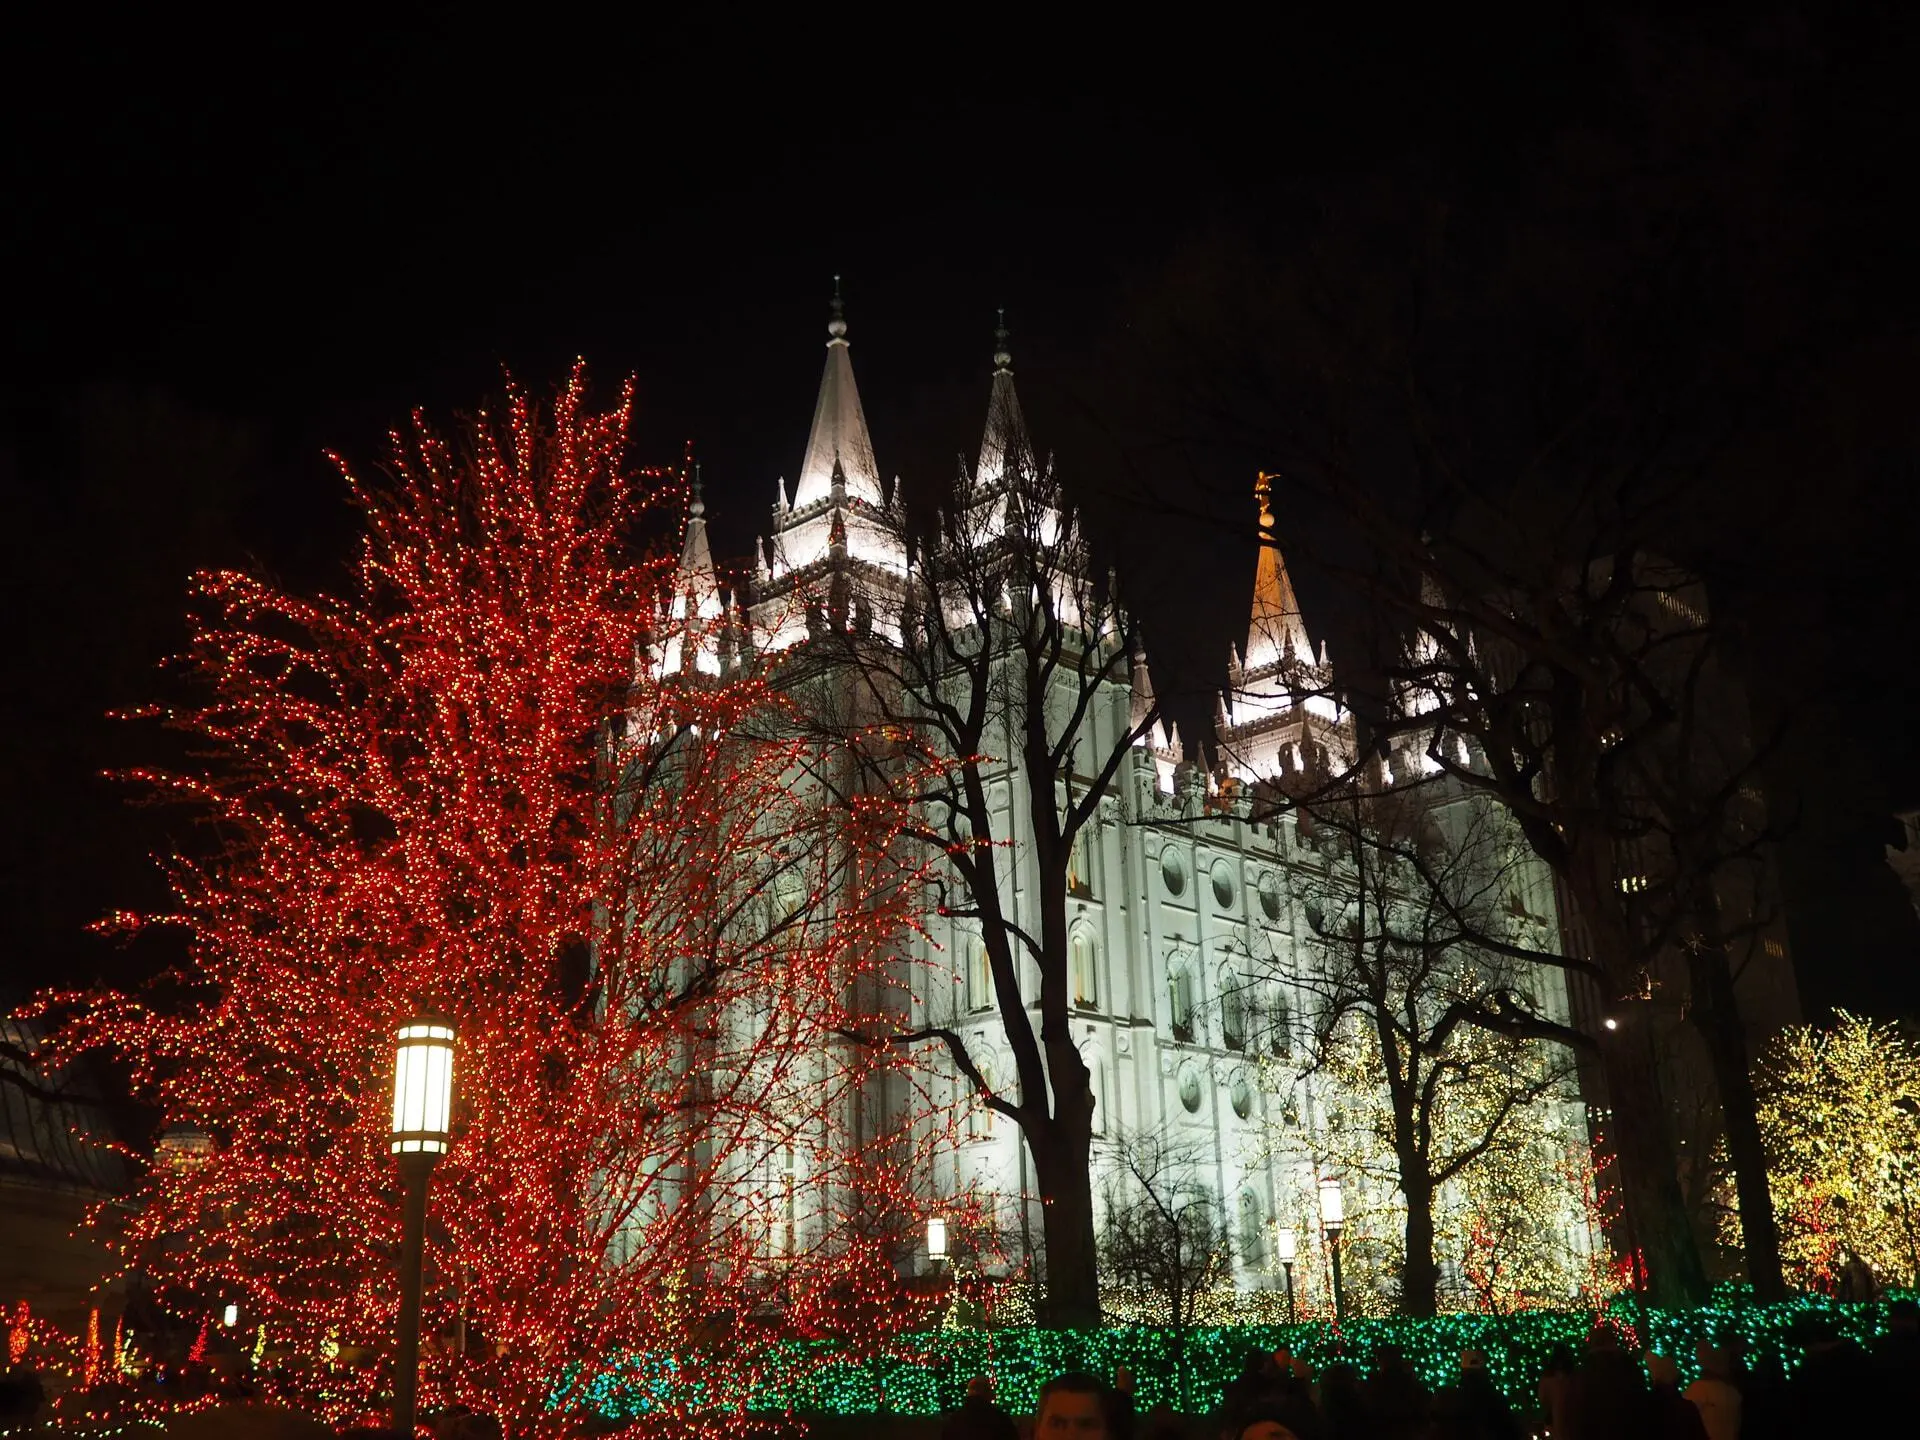 Temple Square is lit up with Christmas lights